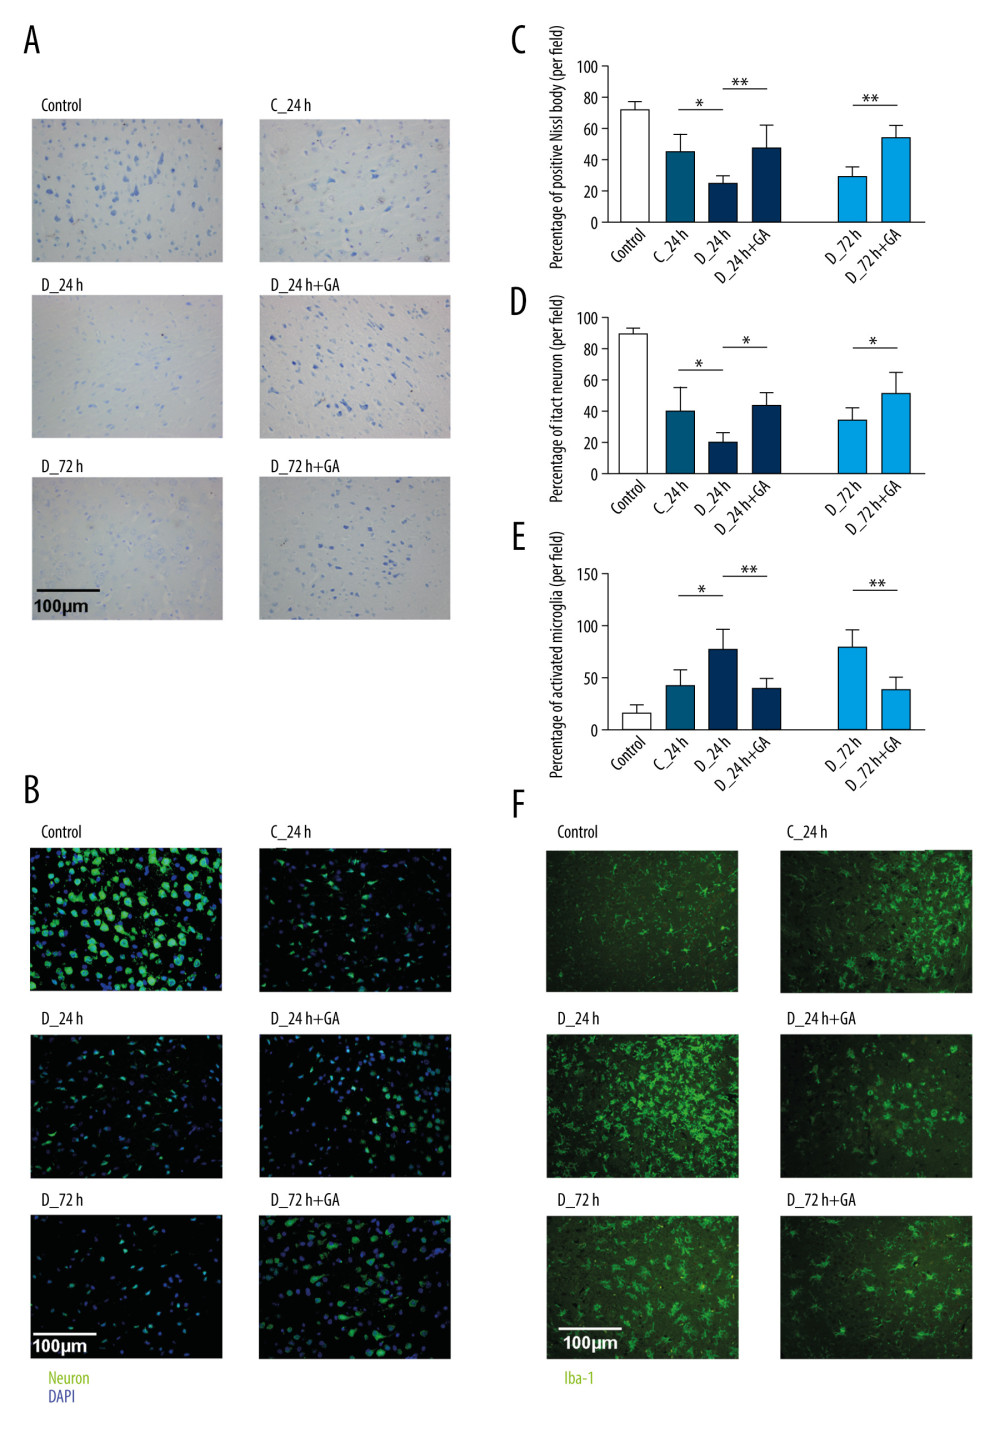 Post-treatment GA decreased neuronal loss and microglial activation. (A) Nissl staining. (B) Immunofluorescence staining of neurons. (C, D) Percentages of cells positive for Nissl staining and positive for neuronal cell markers. (E) Immunofluorescence staining of iba-1 labeled microglial. (F) Percentages of cells positive for iba-1. Data are shown as mean±SD. The images are representative of 6 independent experiments. The 2 ends of each horizontal line are the 2 groups being compared. * p<0.05, ** p<0.001.